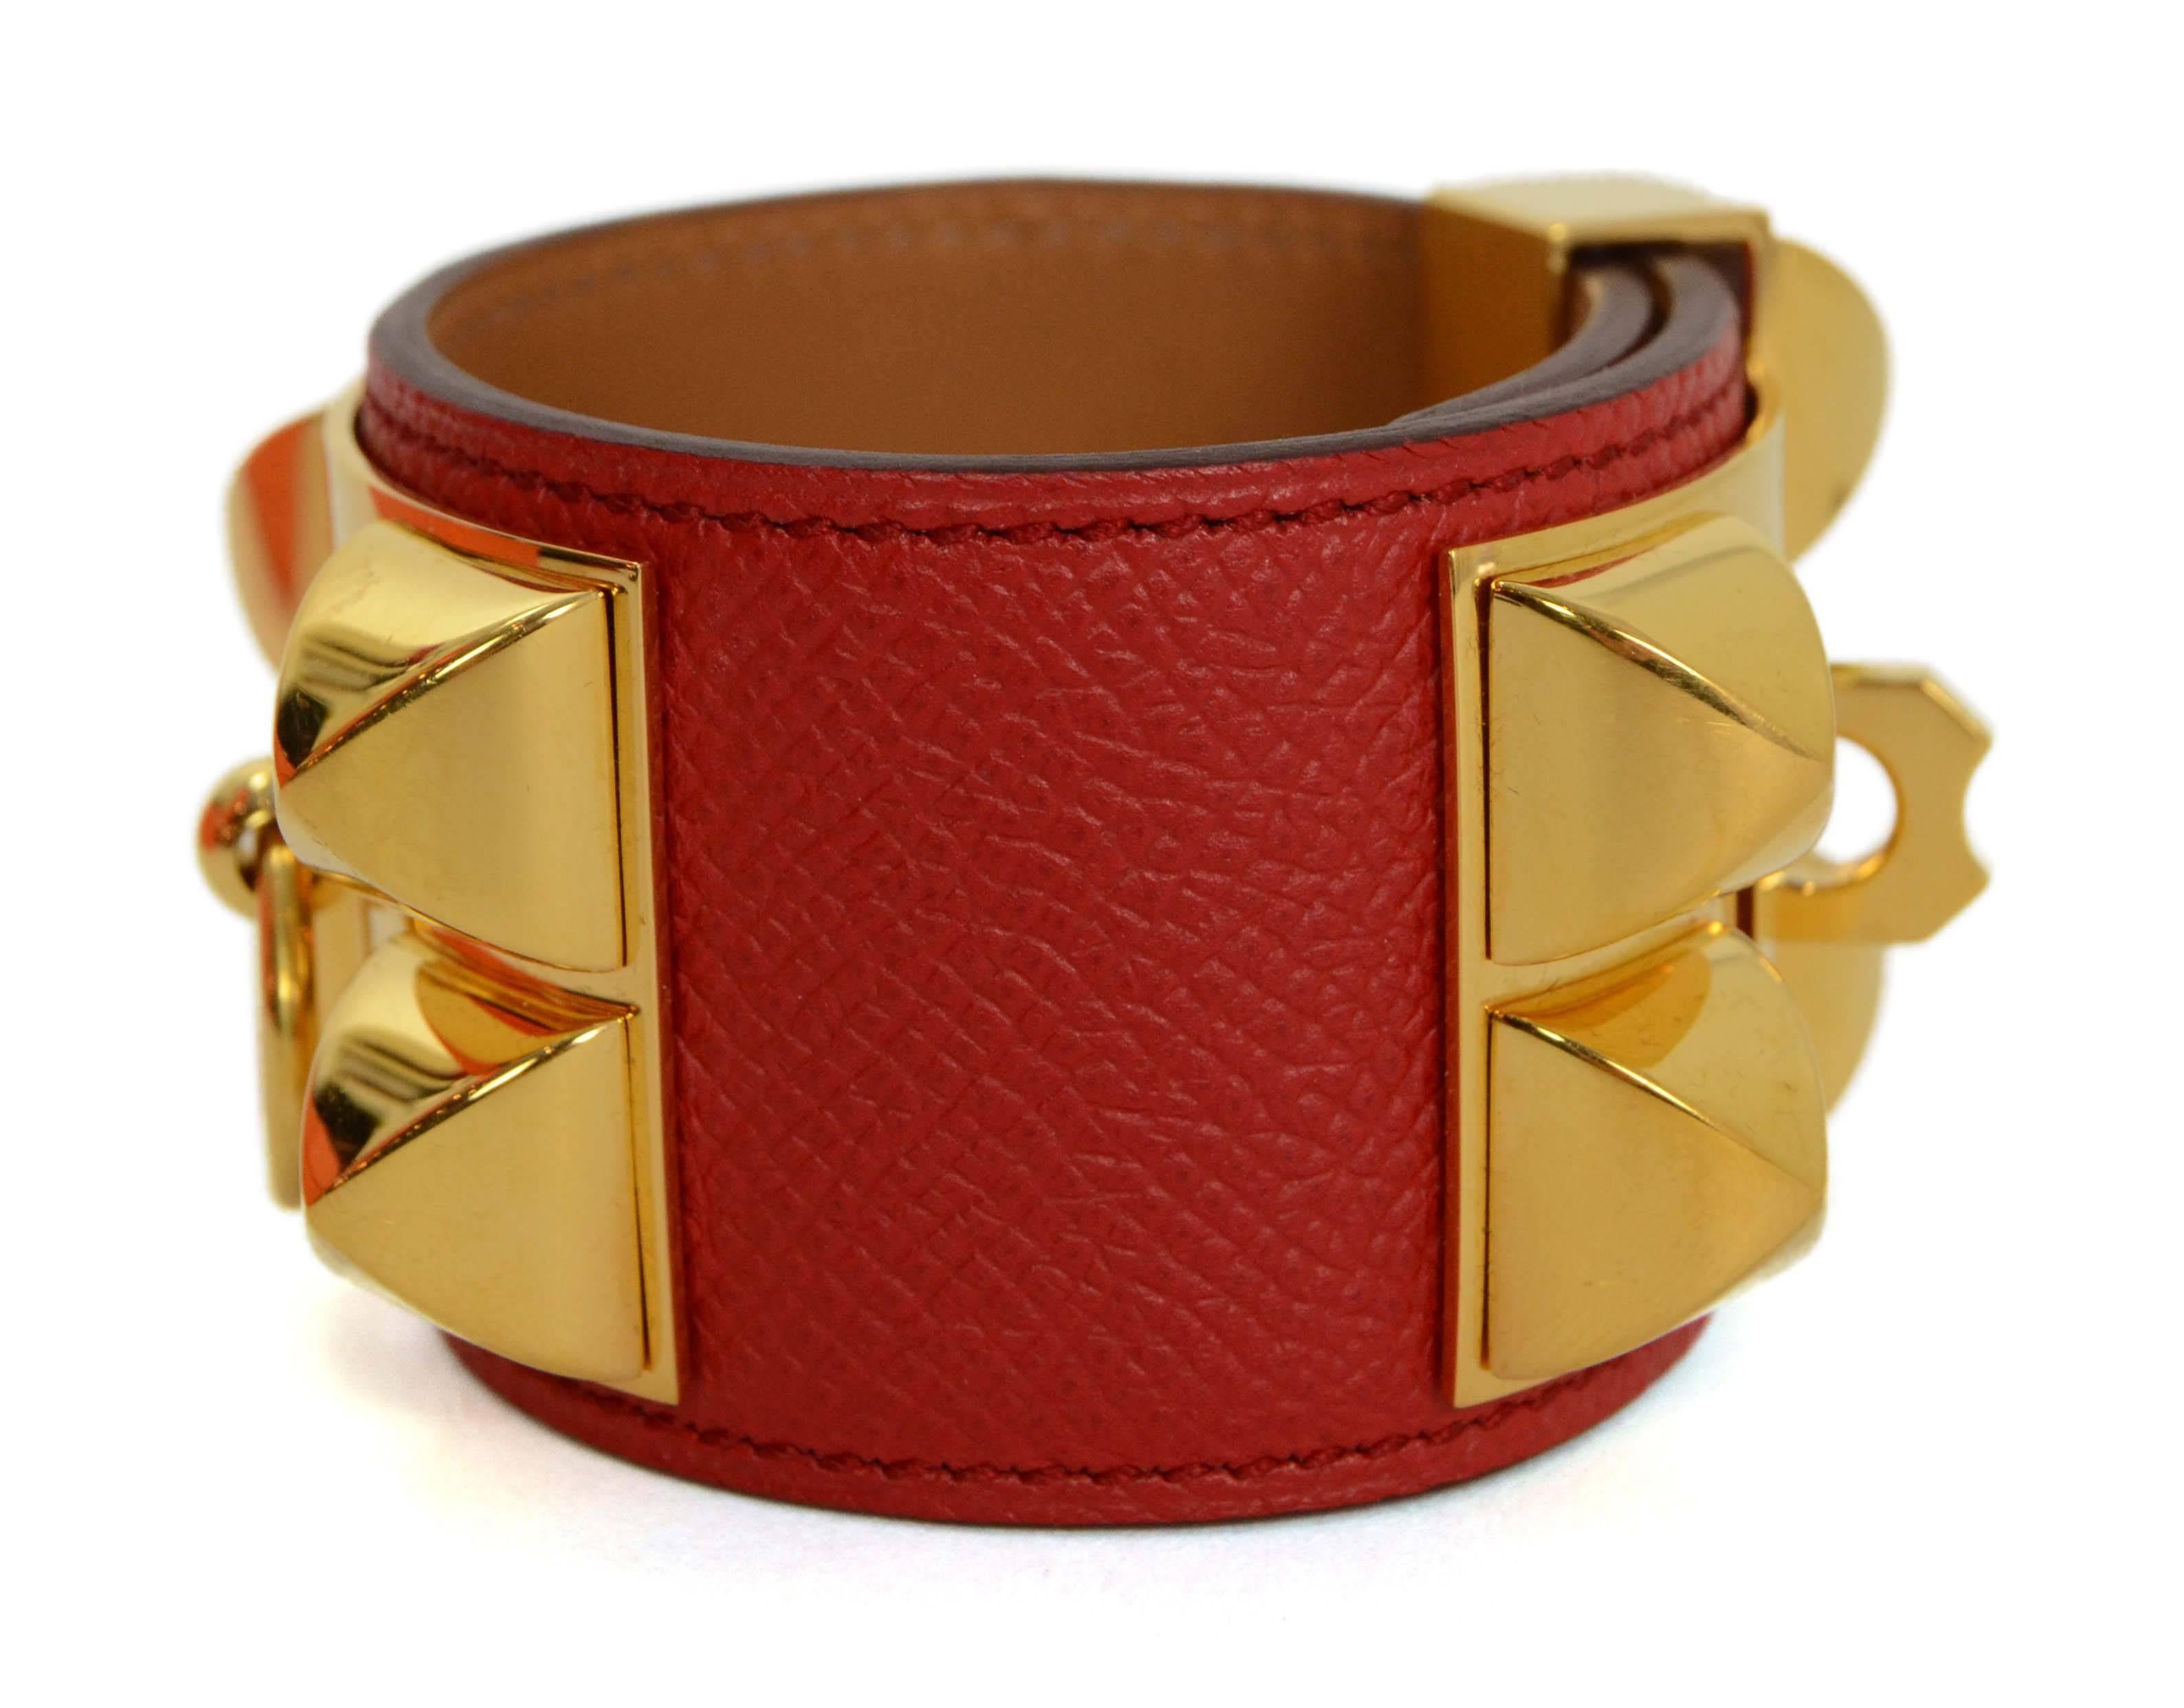 Hermes Rouge Casque Epsom CDC Cuff 
Made In: France
Year of Production: 2013
Color: Rouge casque red
Hardware: Goldtone
Materials: Epsom leather and metal
Closure: Stud and notch closure
Stamp: Q stamp in square
Overall Condition: Excellent